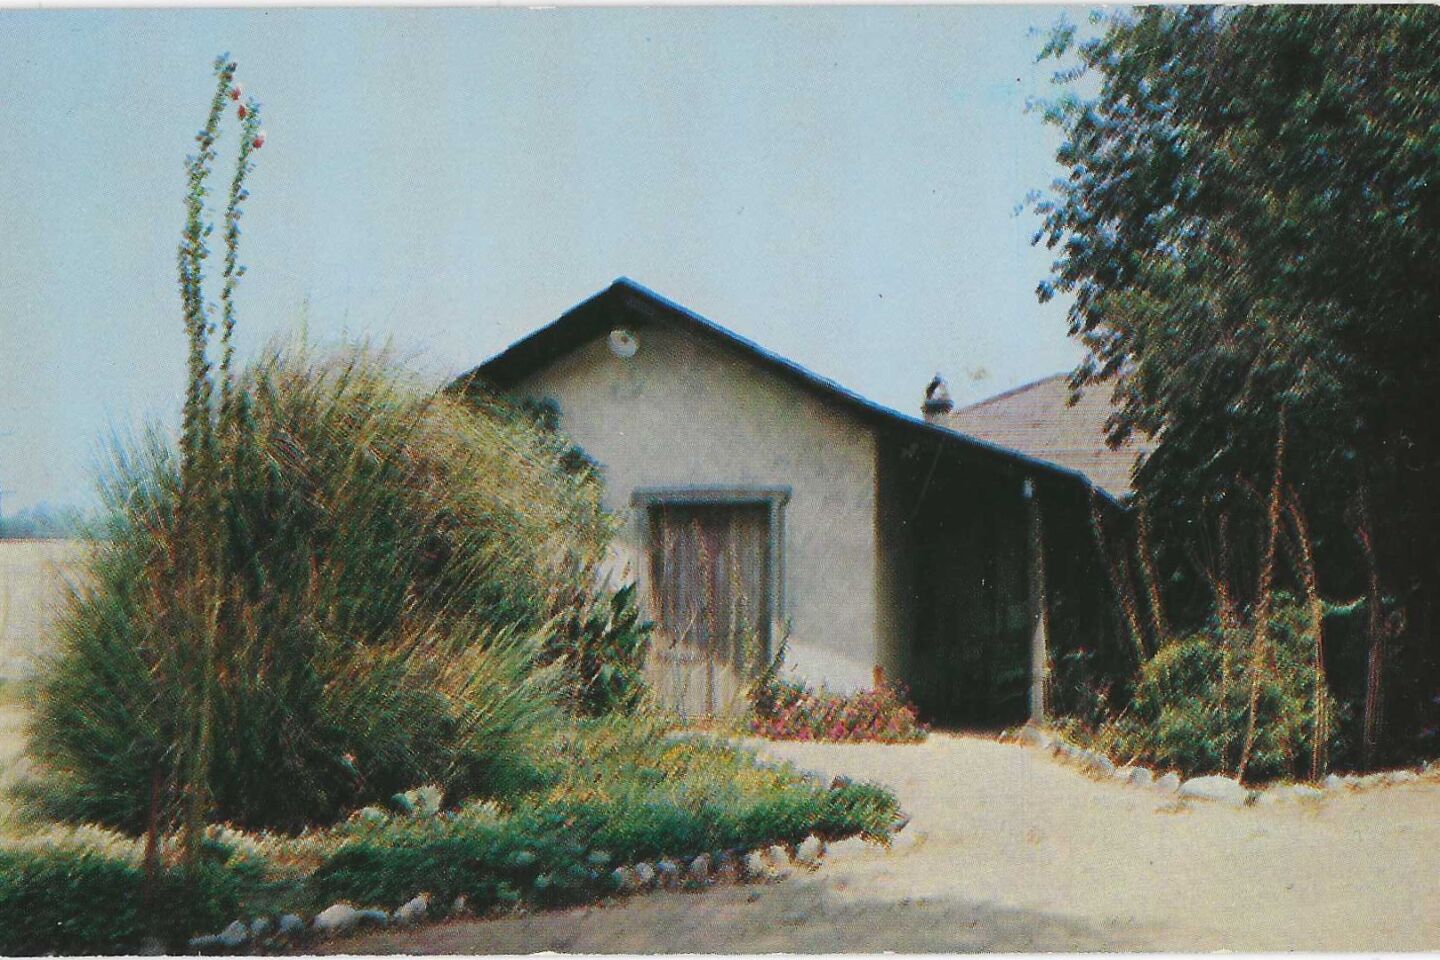 The front of a postcard showing Palomares Adobe